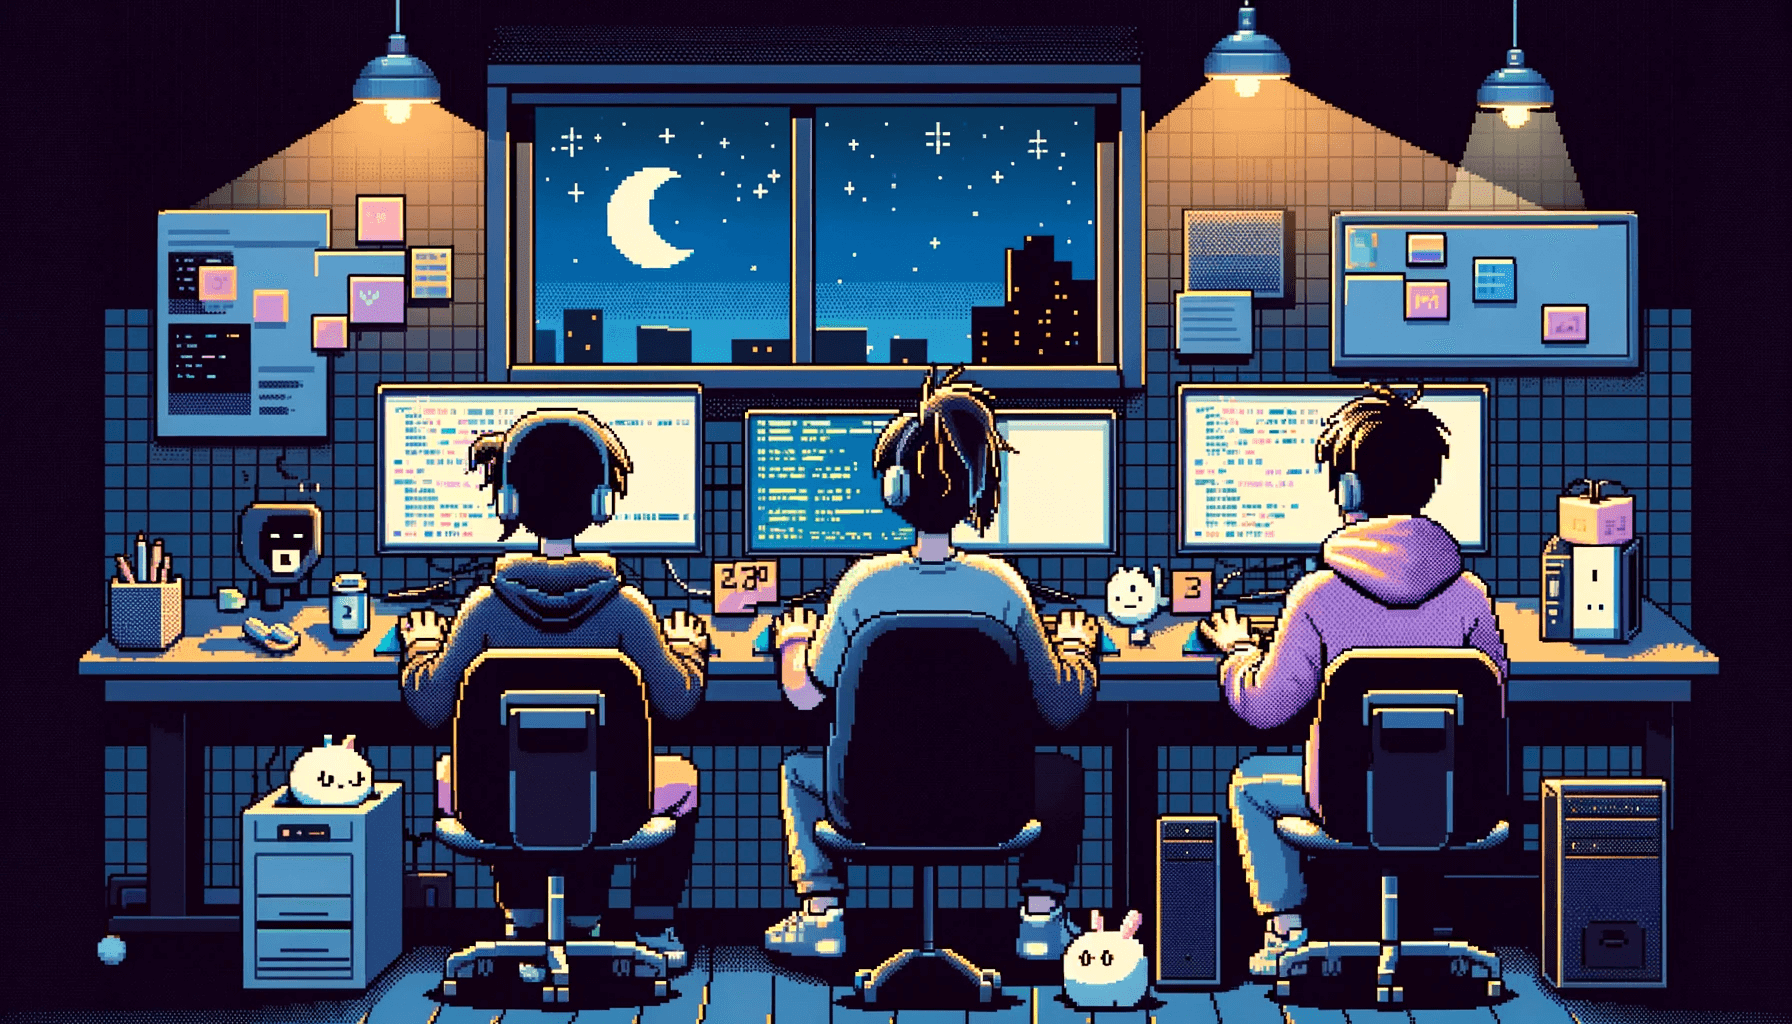 Two participants in the hackathon room, shown from the back, focused on their screens, programming. Enhance the nighttime atmosphere by adding elements like a dark sky visible through a window, and indoor lighting that subtly suggests it's late at night. Integrate elements to emphasize the use of Generative AI, such as a cute robot assisting in pair programming. The overall mood should convey a late-night coding session, blending the themes of technology, and a cozy, nocturnal setting, 2D pixel arts.